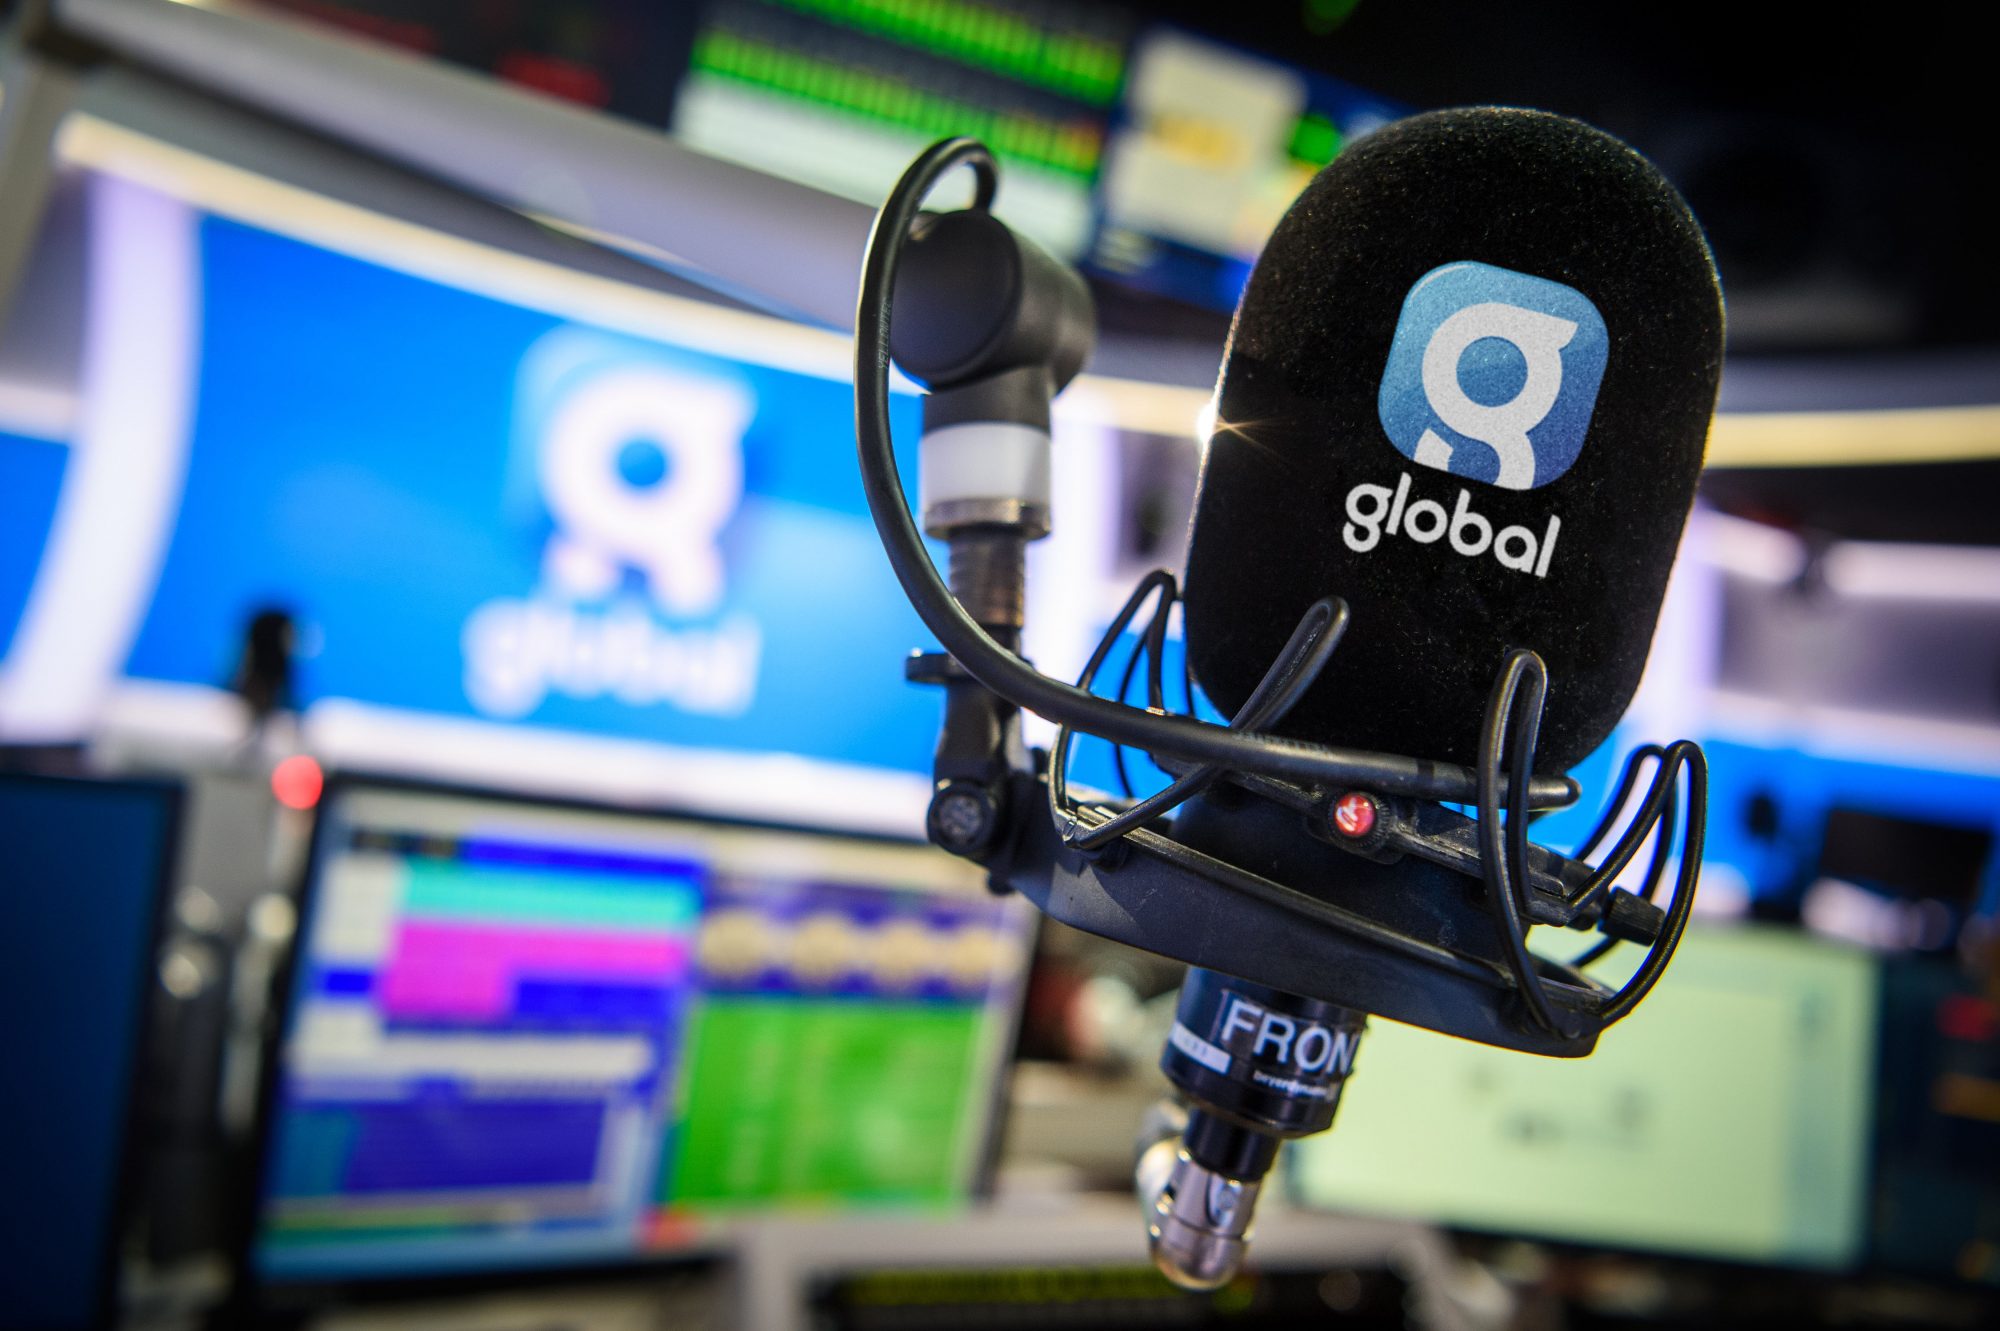 Documents confirm: Global was bidding for two FM frequencies